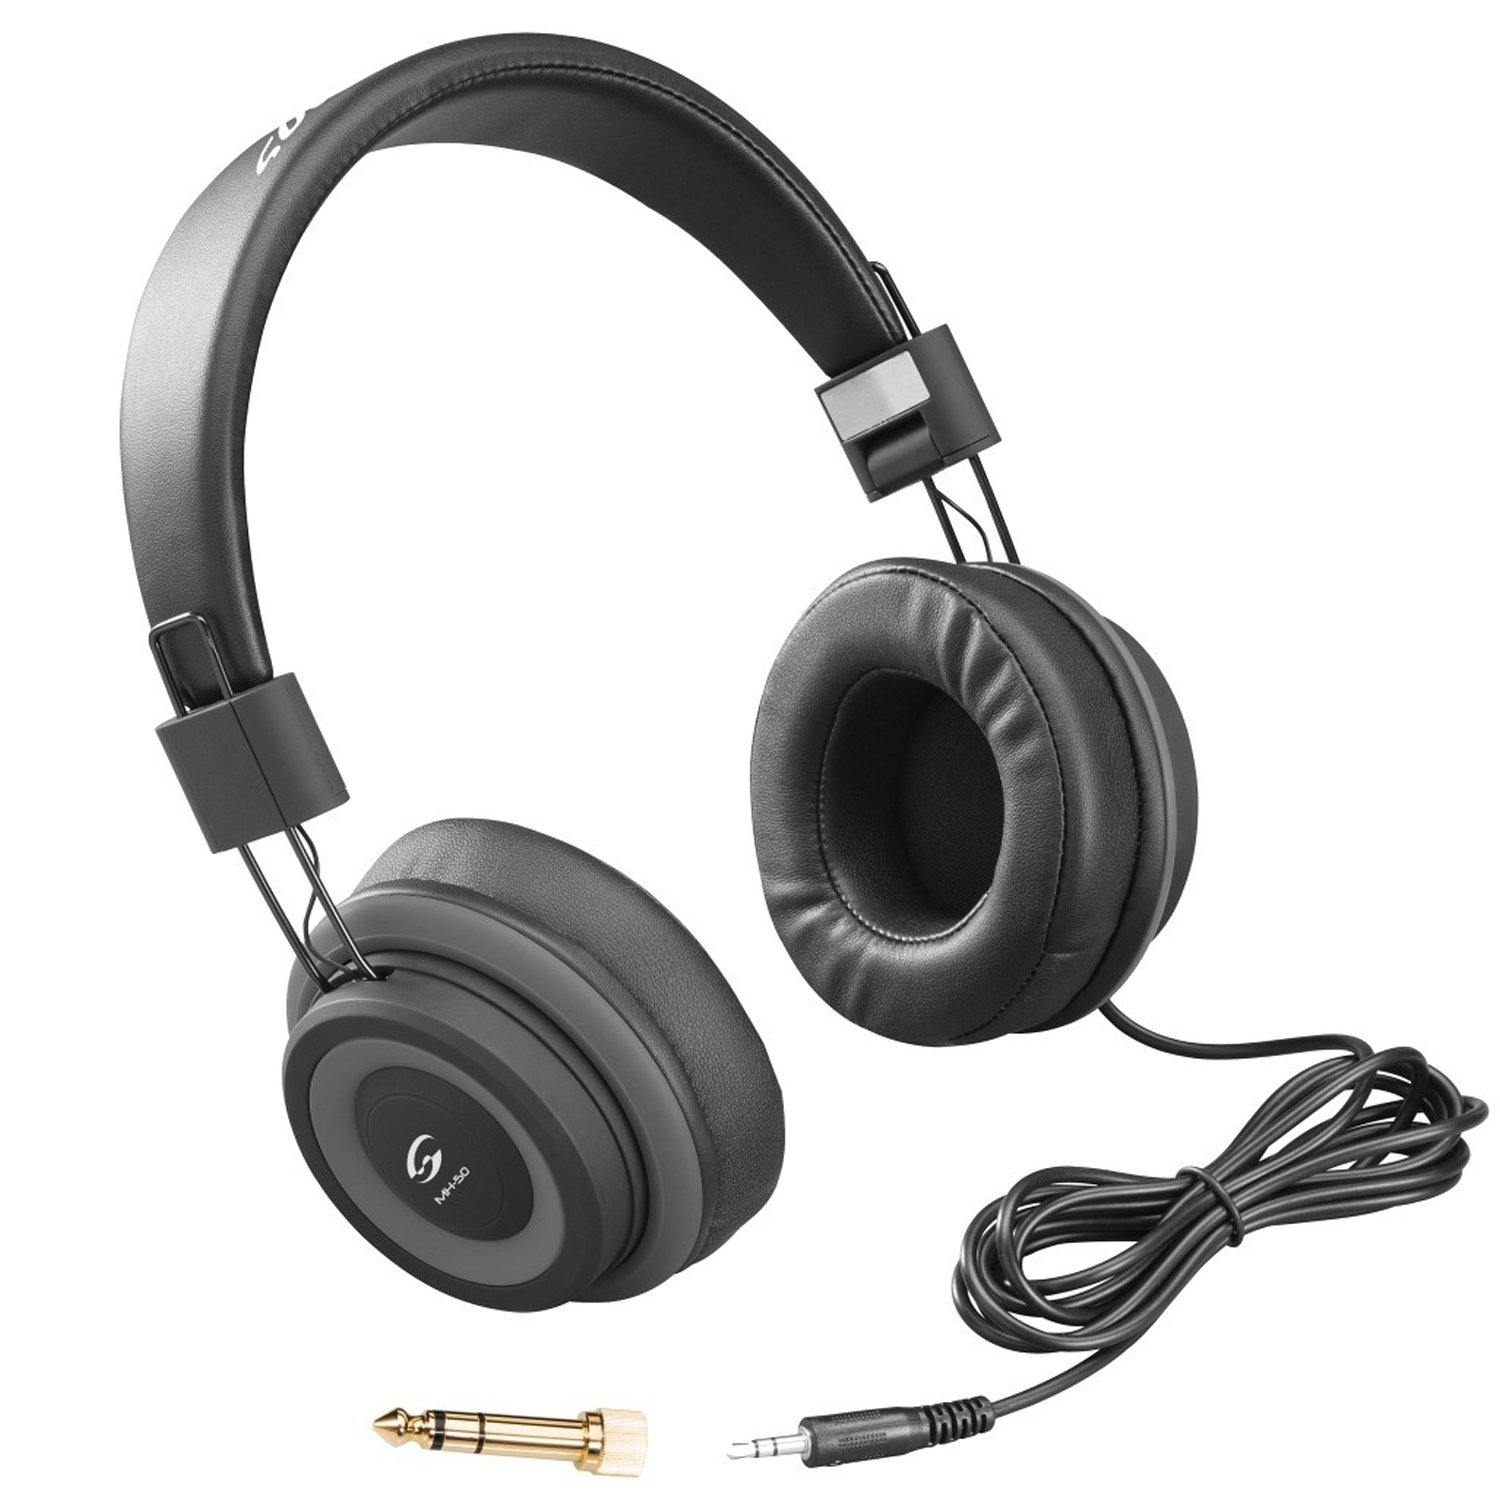 Soundsation MH-50 Wired Stereo Headphones - DY Pro Audio